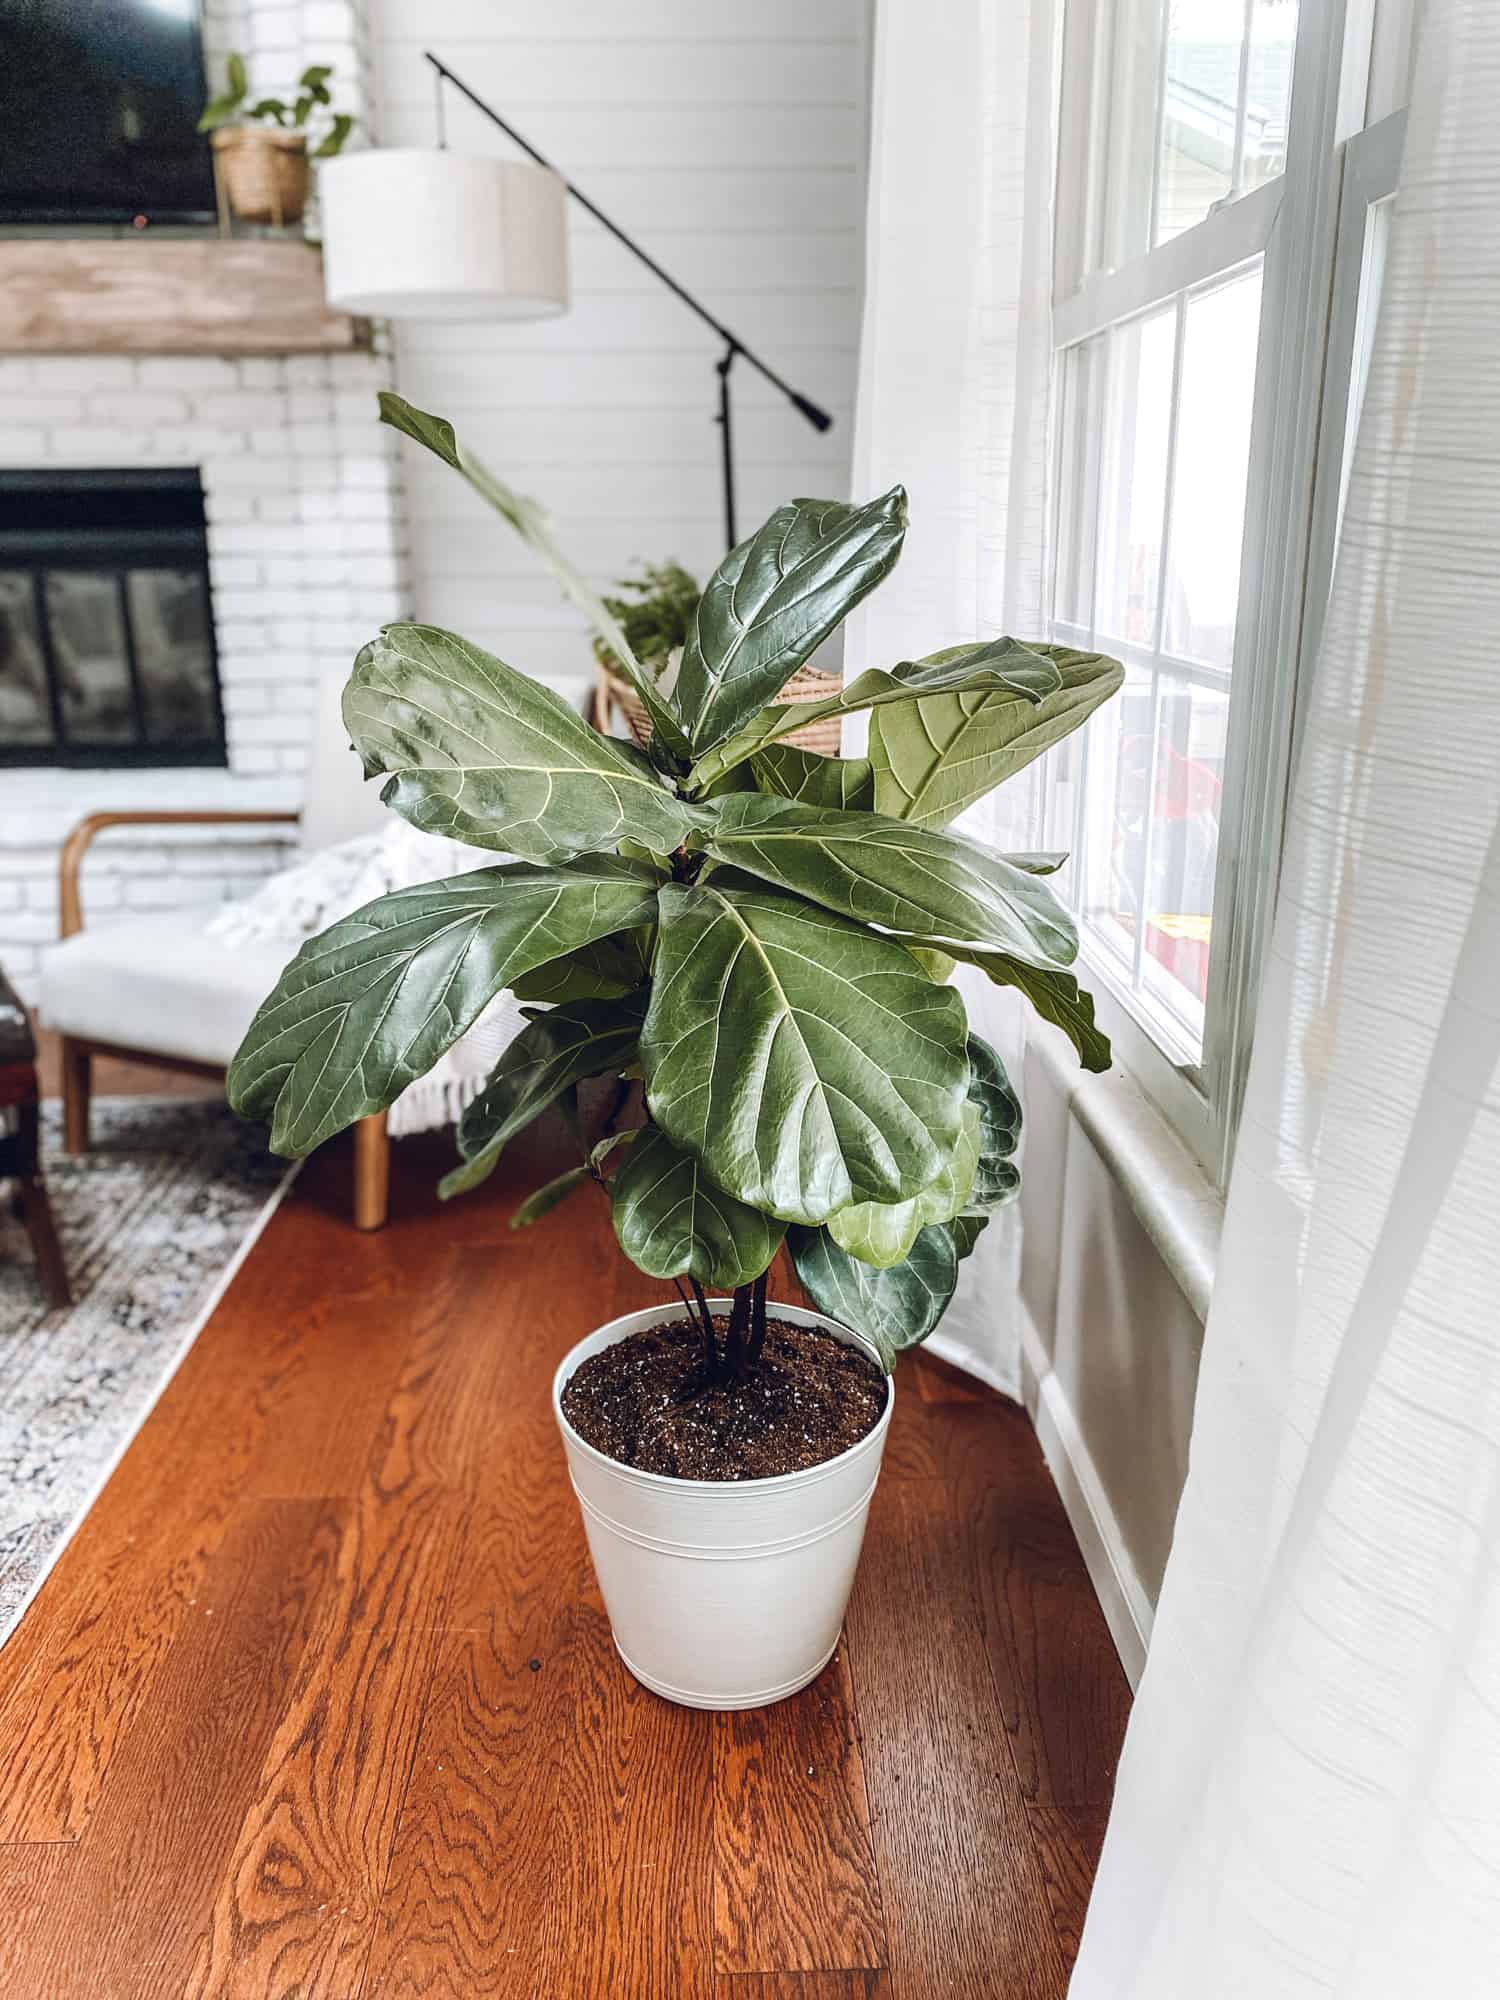 How to Re-pot a Fiddle Leaf Fig